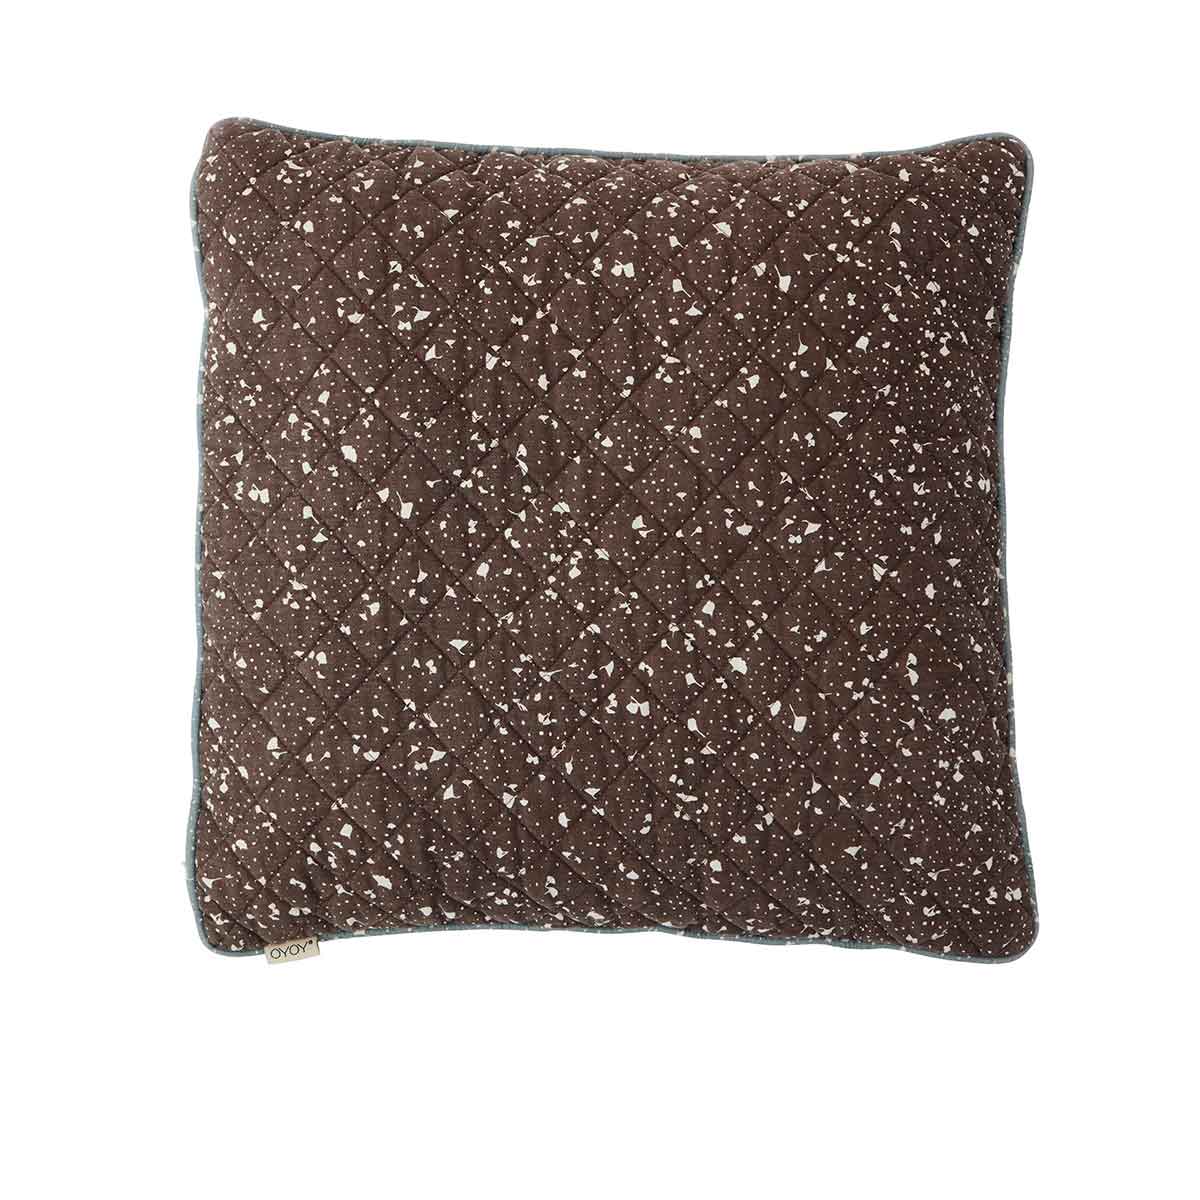 OYOY LIVING Cushion Aya Quilted Cushion 301 Brown / Offwhite